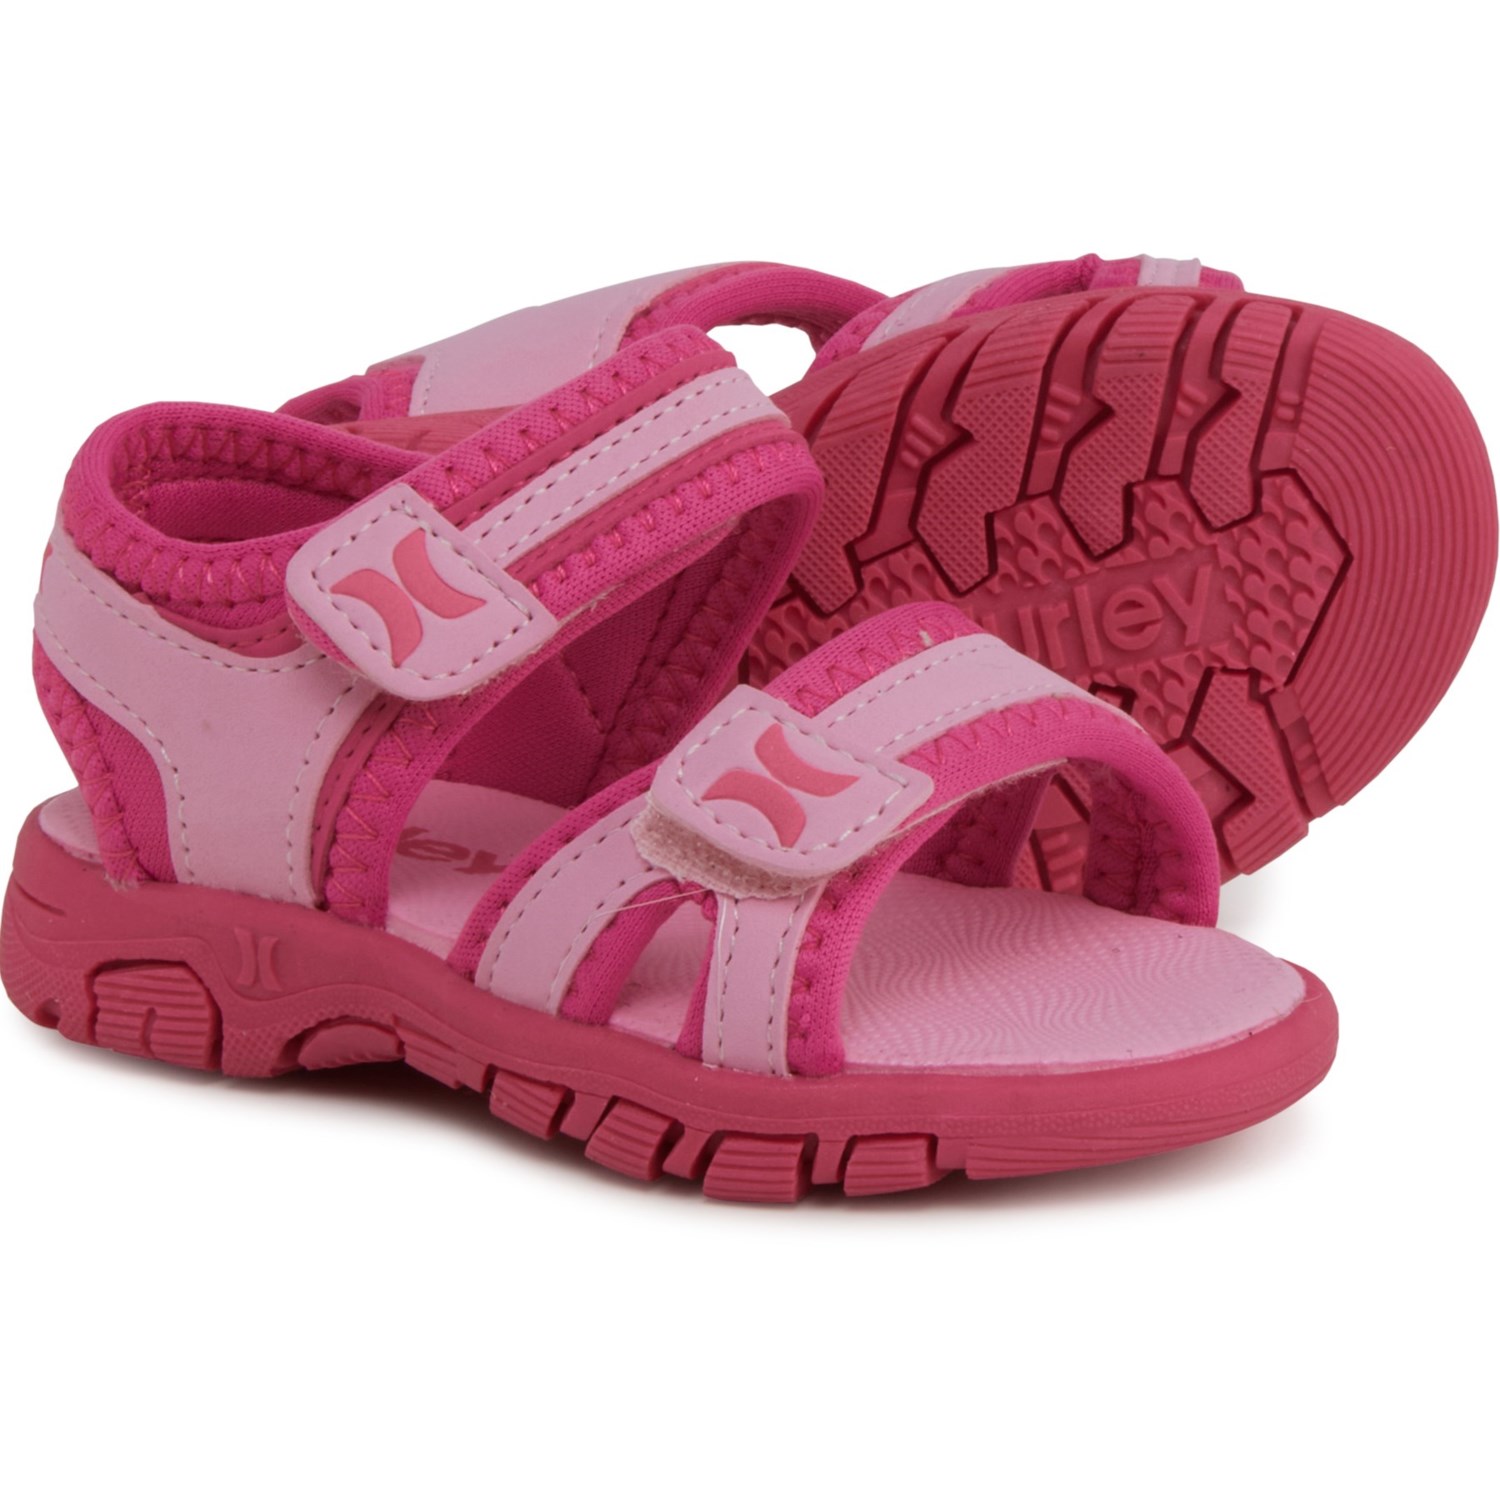 Hurley Footwear Toddler Boys and Girls Loni Sport Sandals